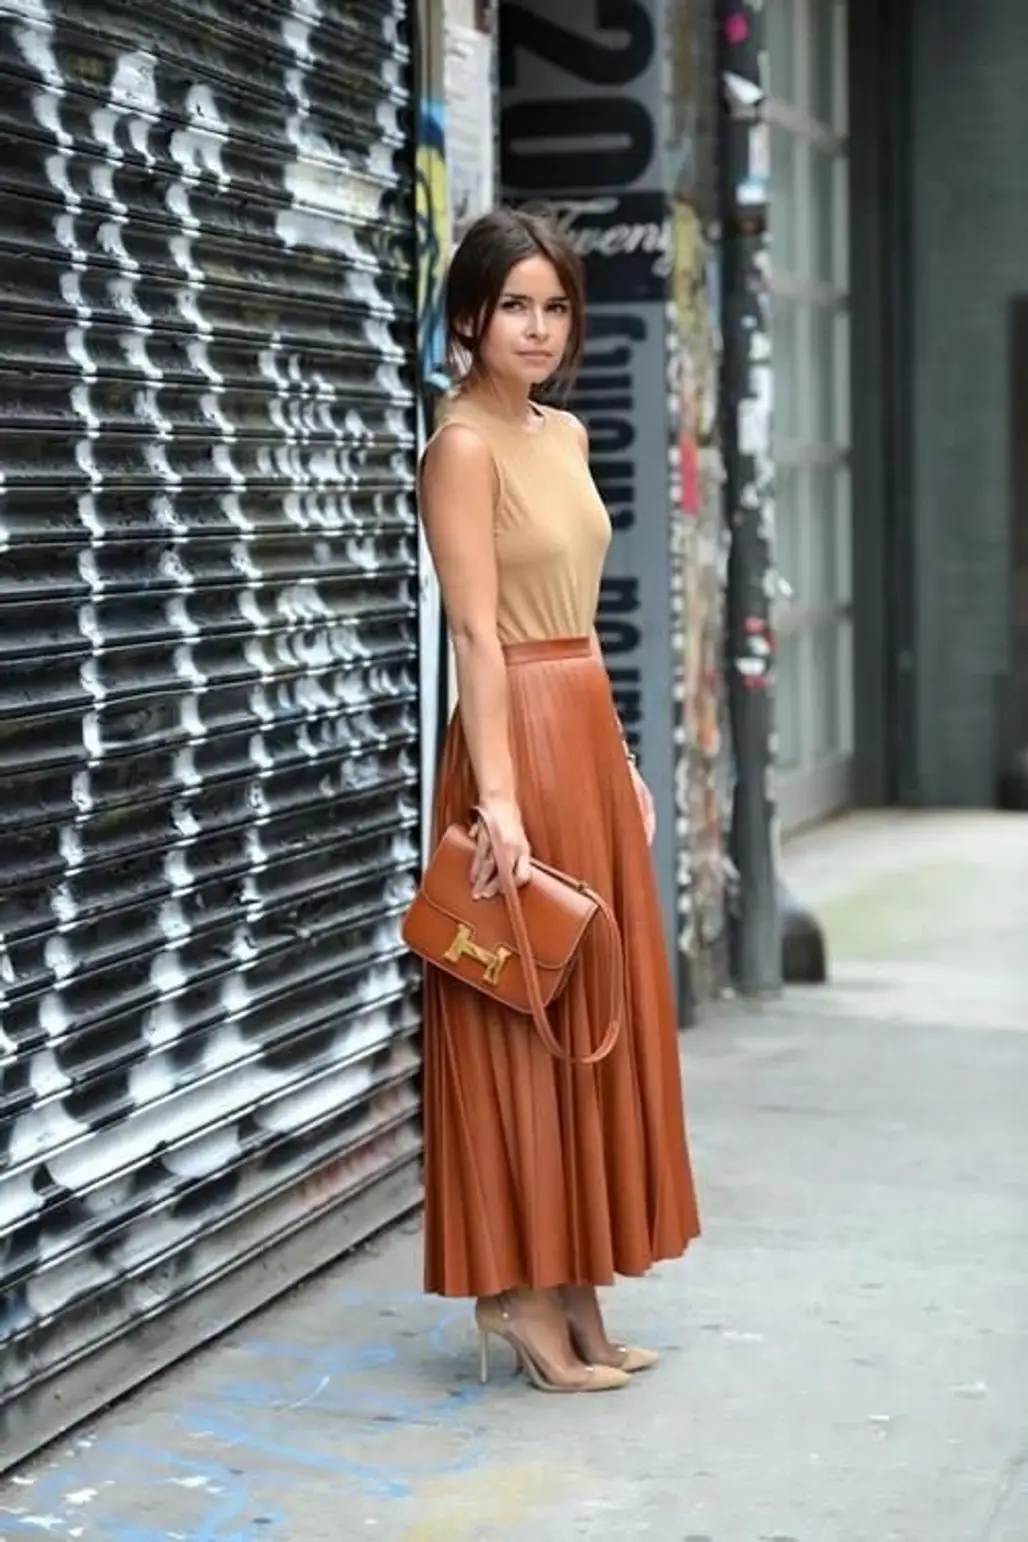 Leather Maxi Skirt